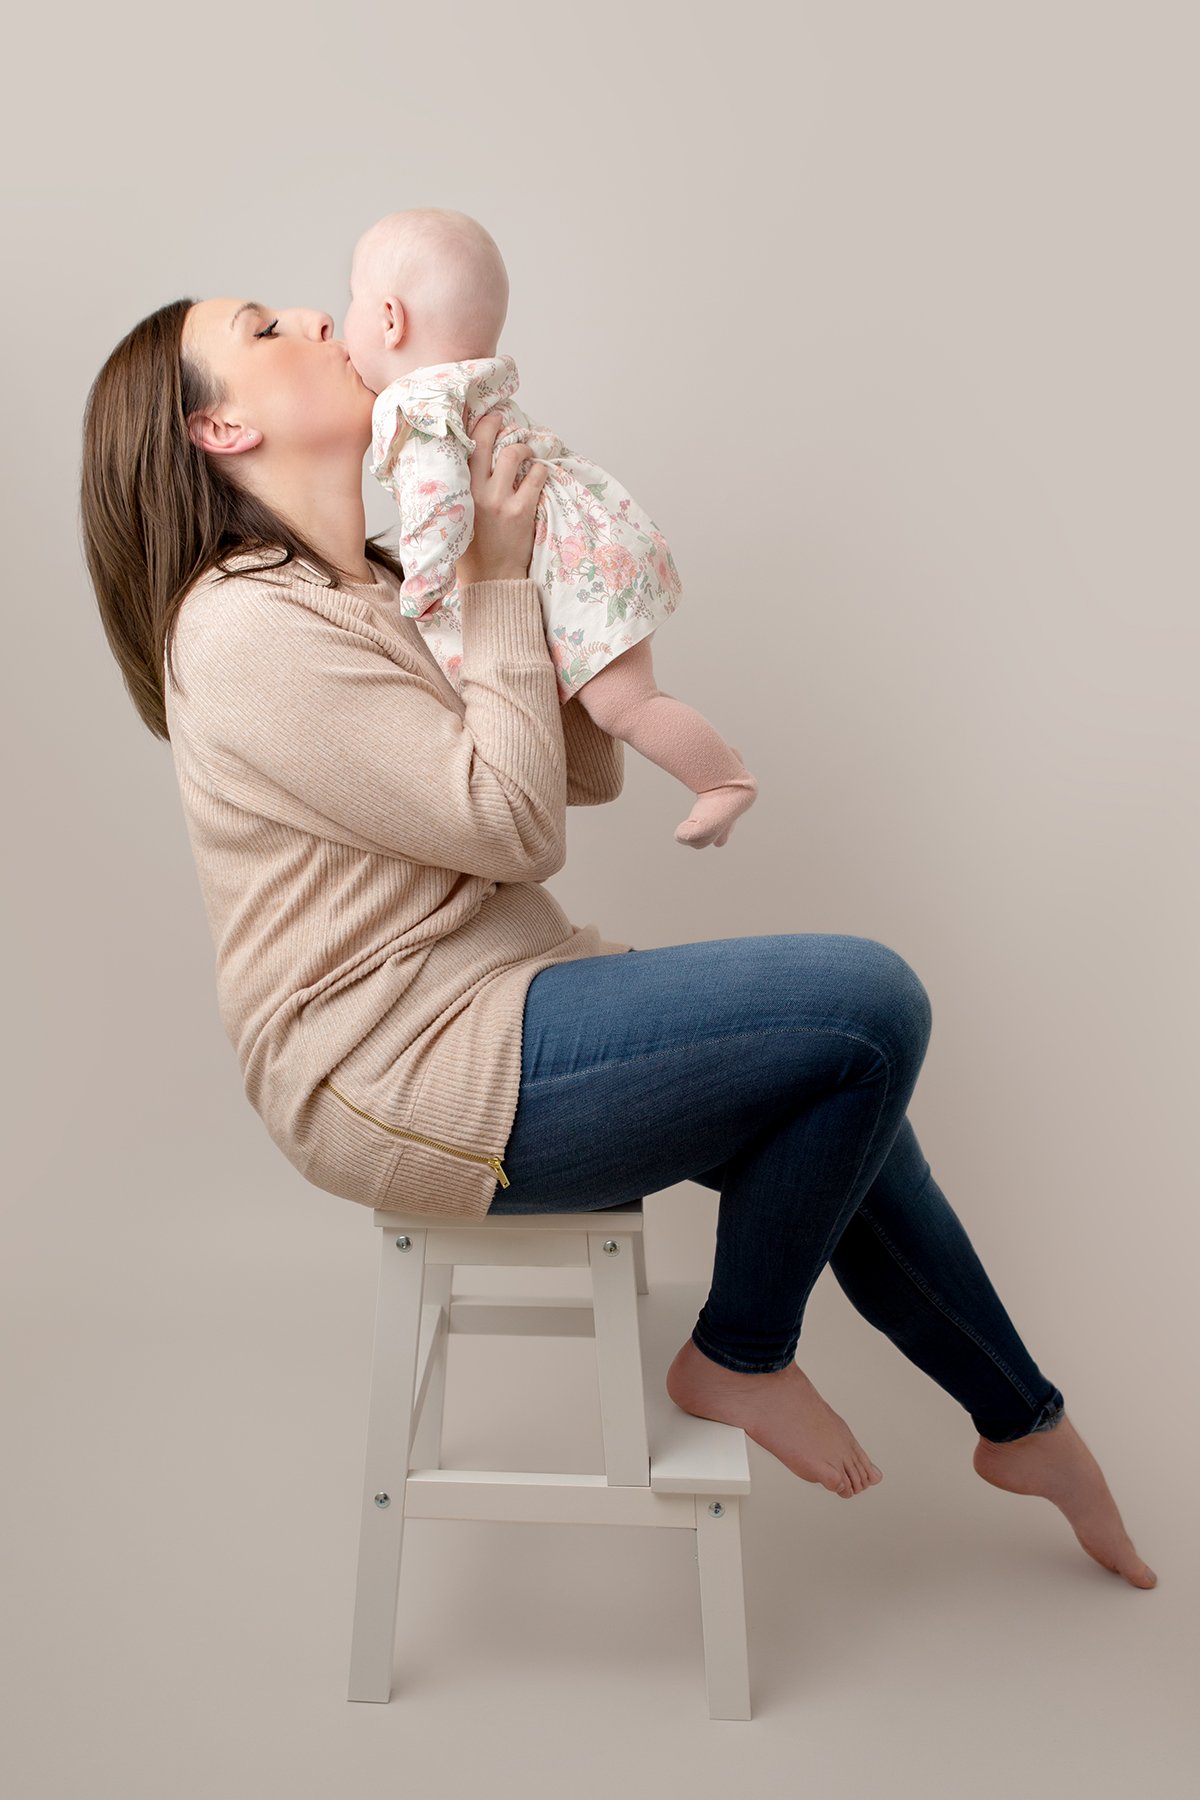 Mum sitting on a stool holding up and kissing her 3 month old baby girl at their professional photo shoot